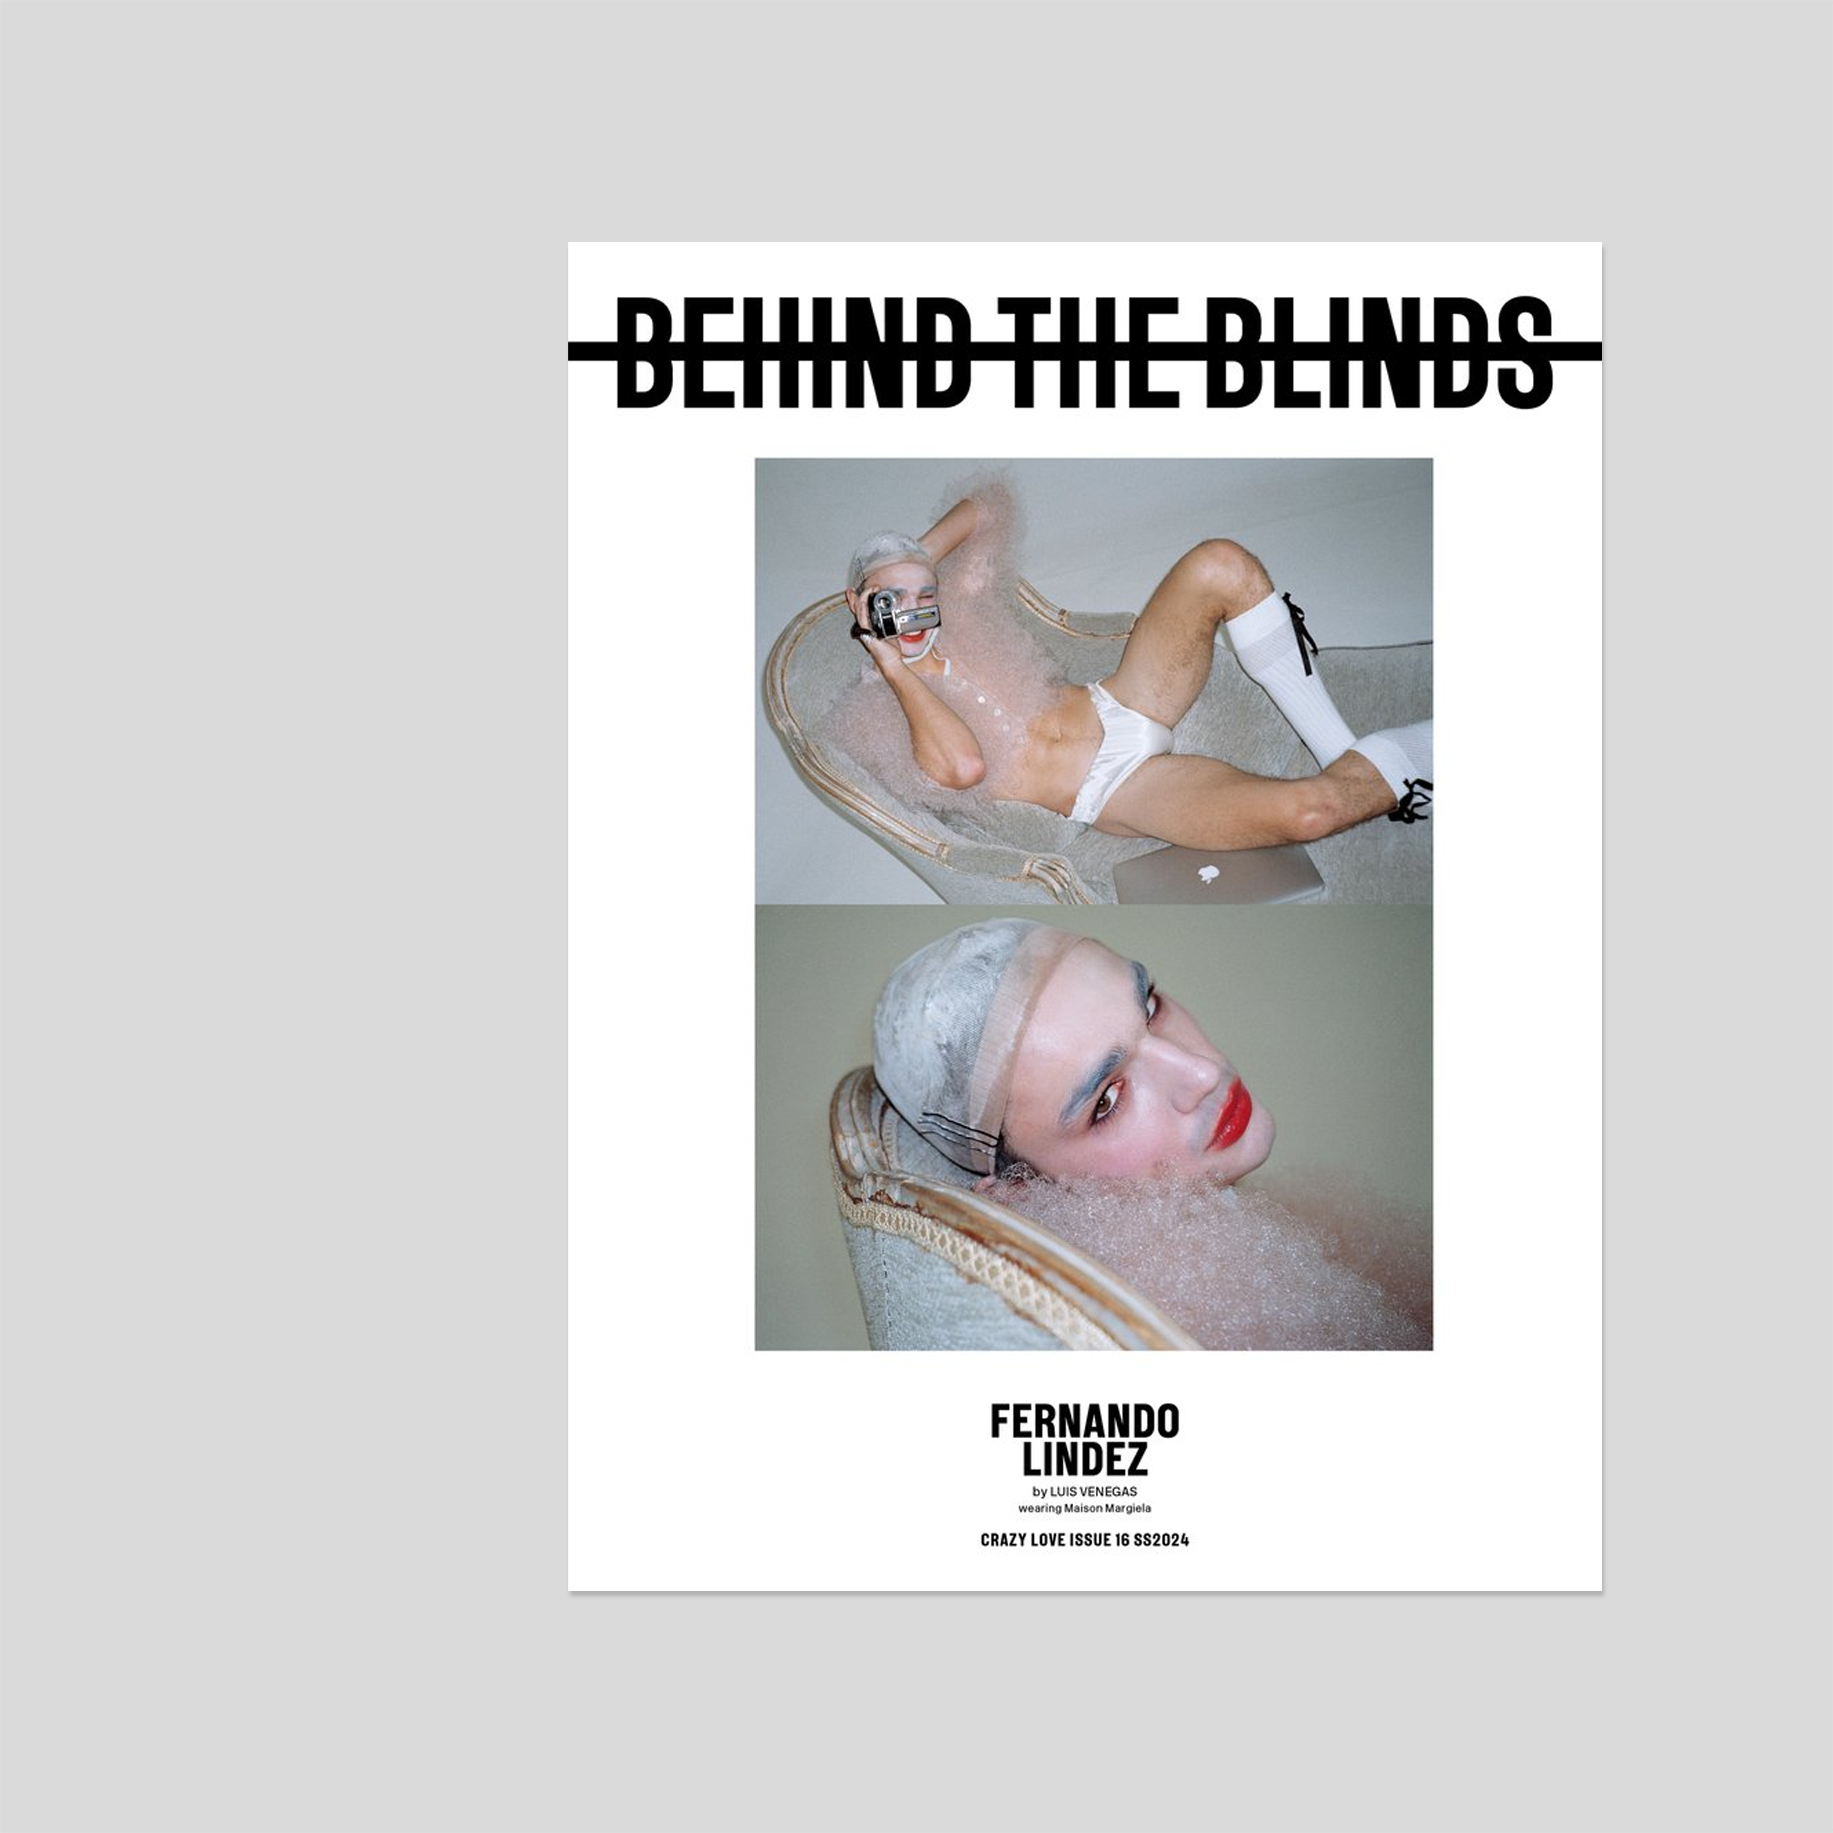 Behind the blinds #16